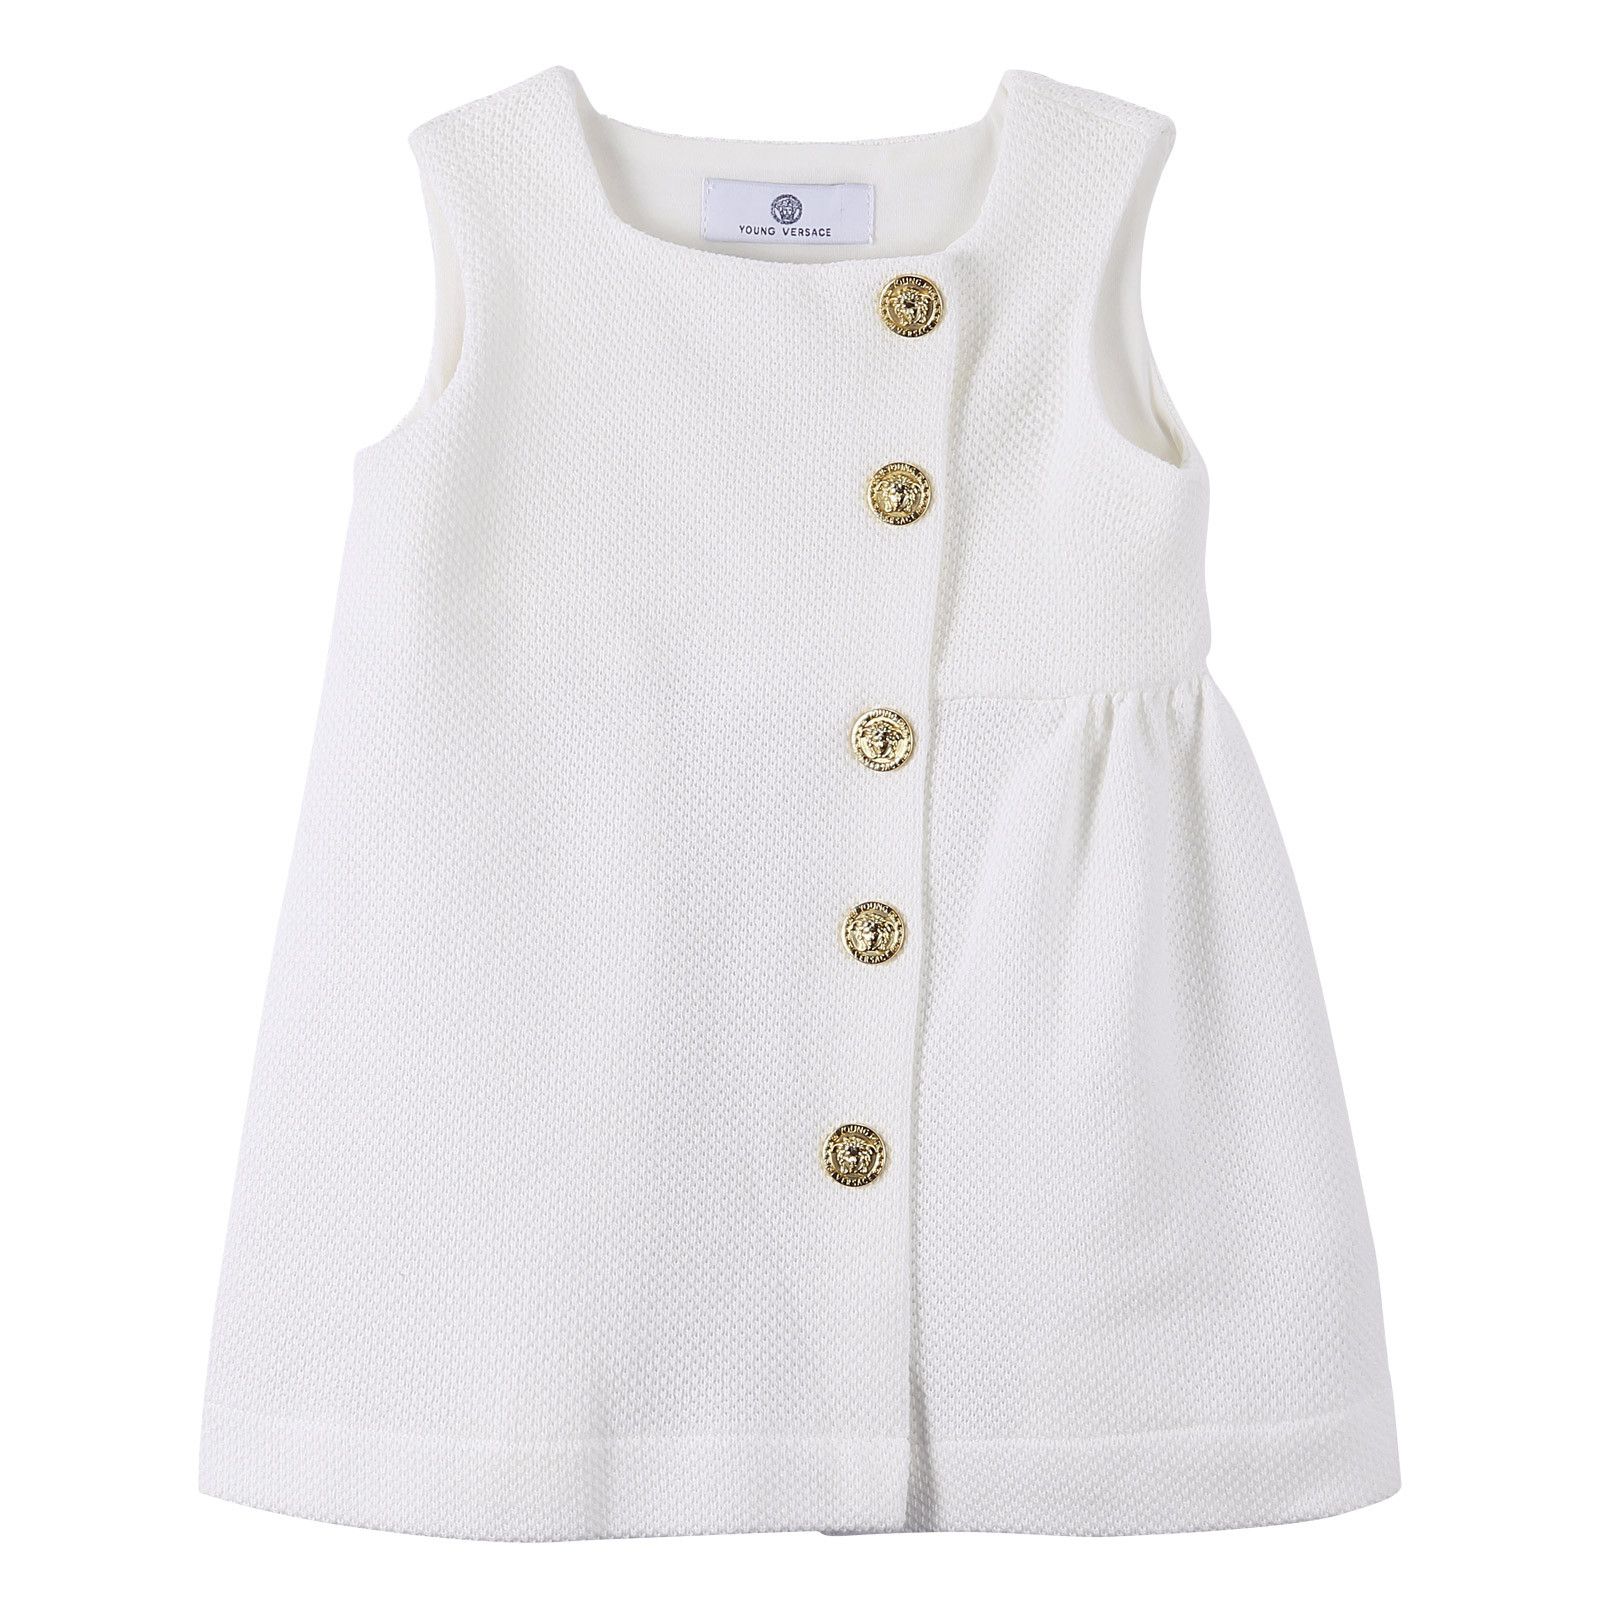 Baby Girls White Dress With Gold Button - CÉMAROSE | Children's Fashion Store - 1